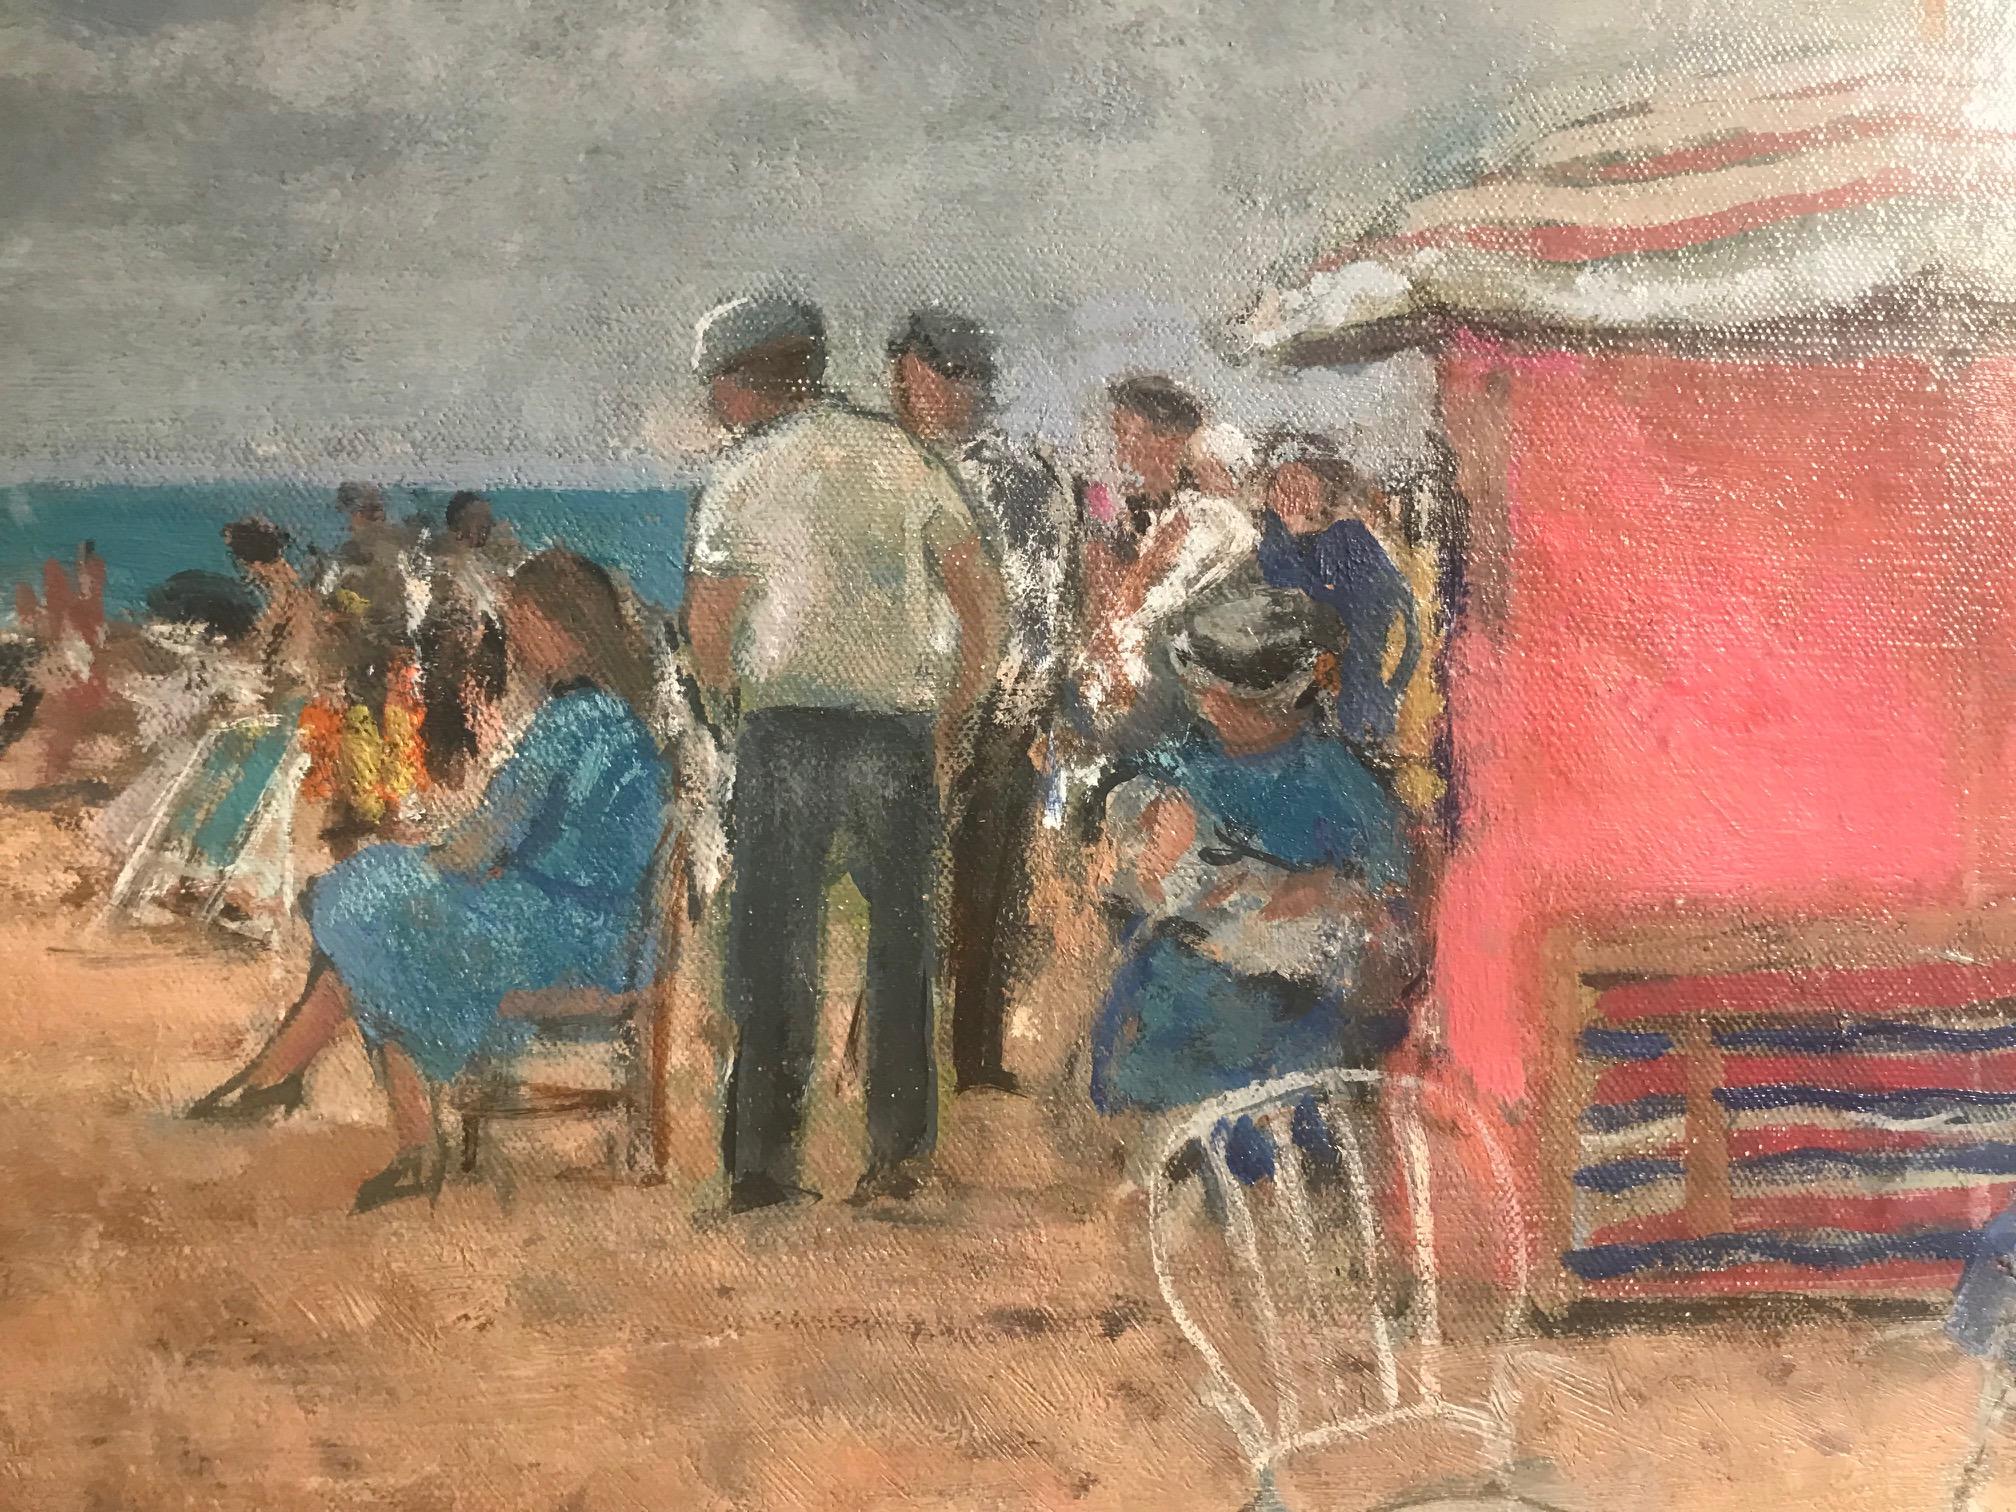 Bright Normandy Beach Scene with Figures, Sea & Boats 'Un Plage, Normandie'.  - Impressionist Painting by François Gall